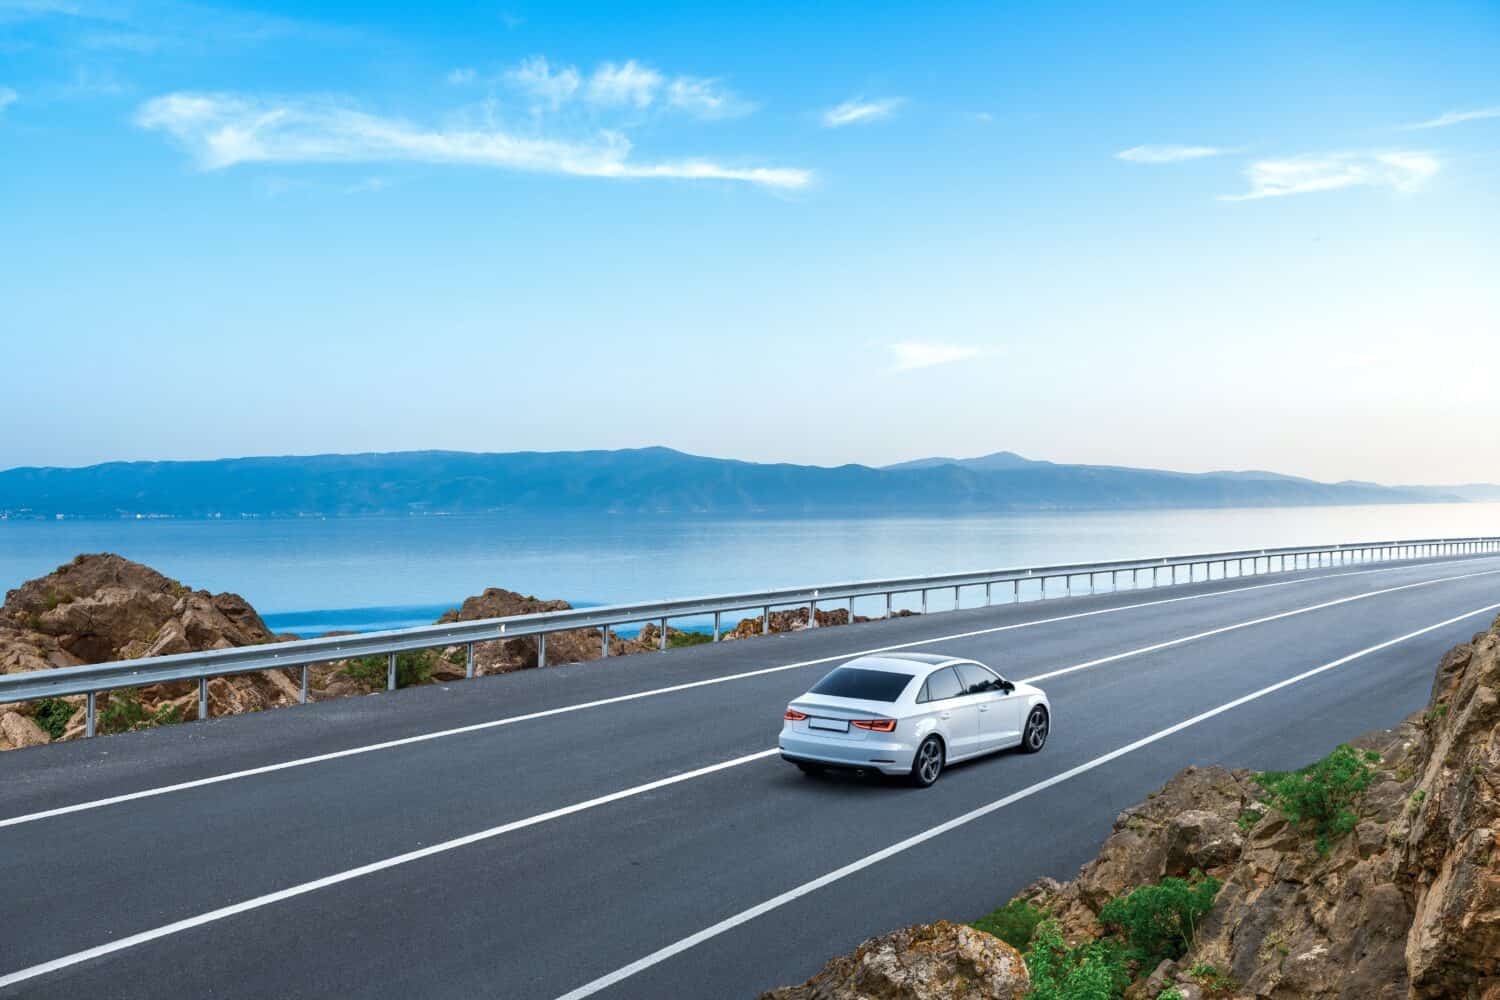 White car driving on the coastal road. road landscape in summer. it's nice to drive on beach side highway. Highway view on the coast on the way to summer vacation. Spain trip on beautiful travel road